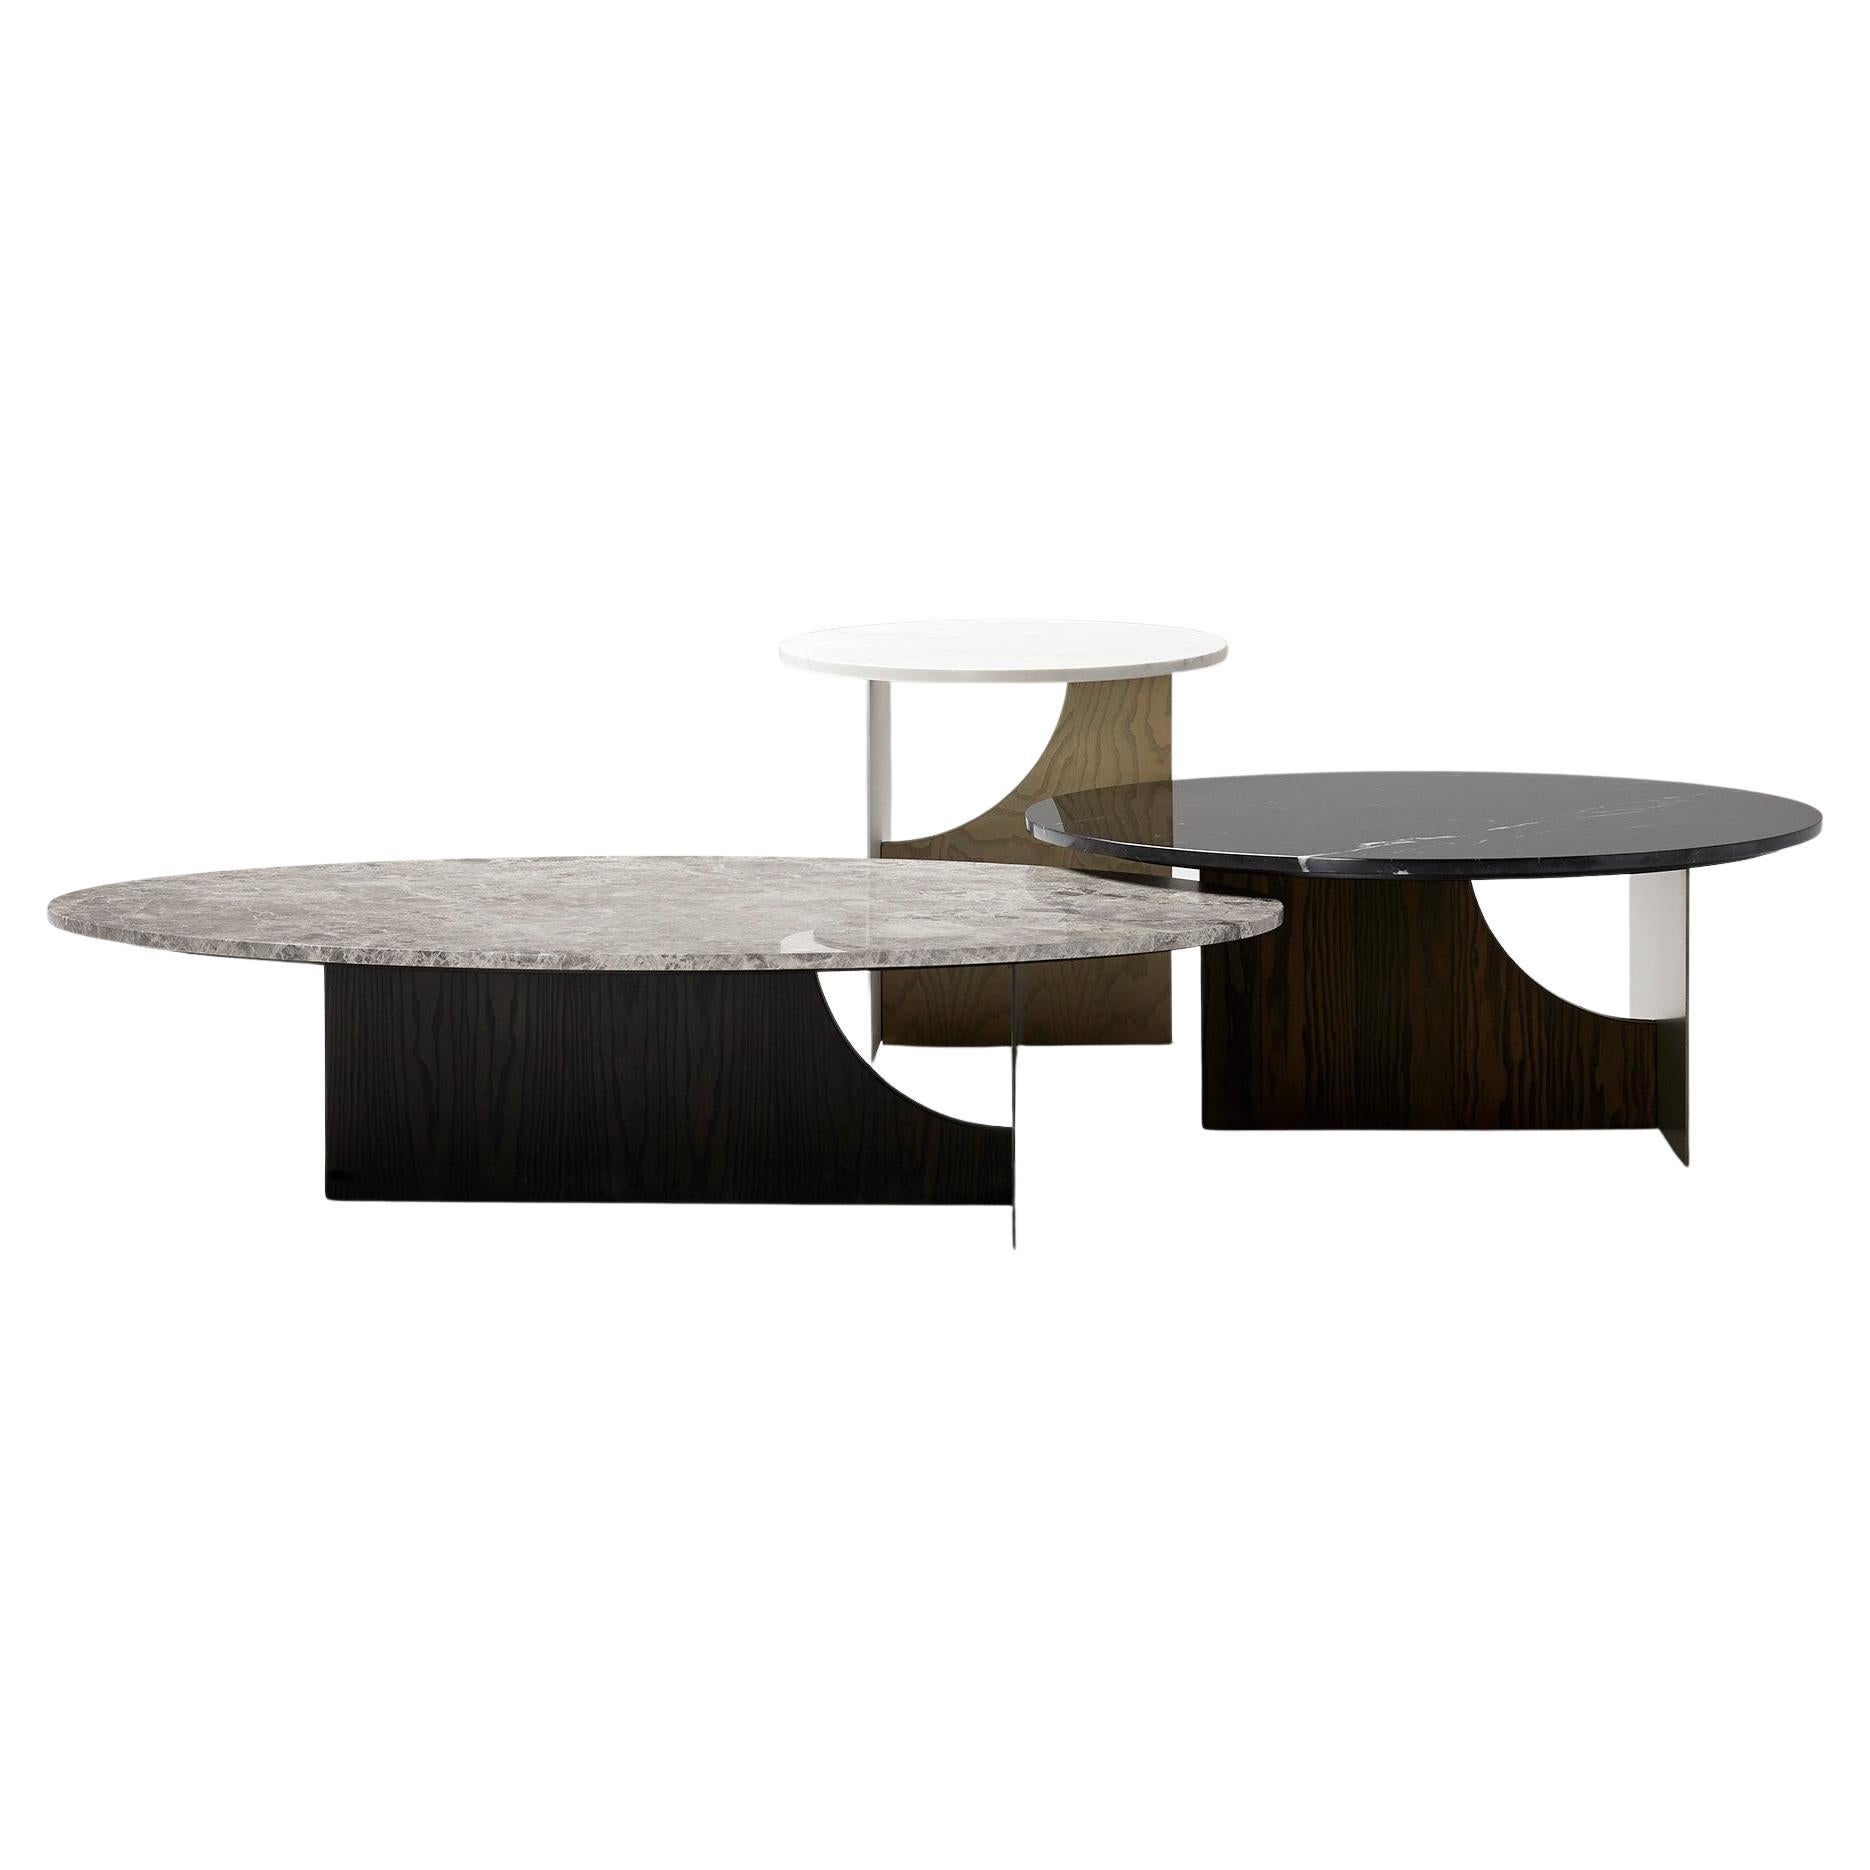 Set of 3 Marble Tables in Custom Wood and Metal Finishes